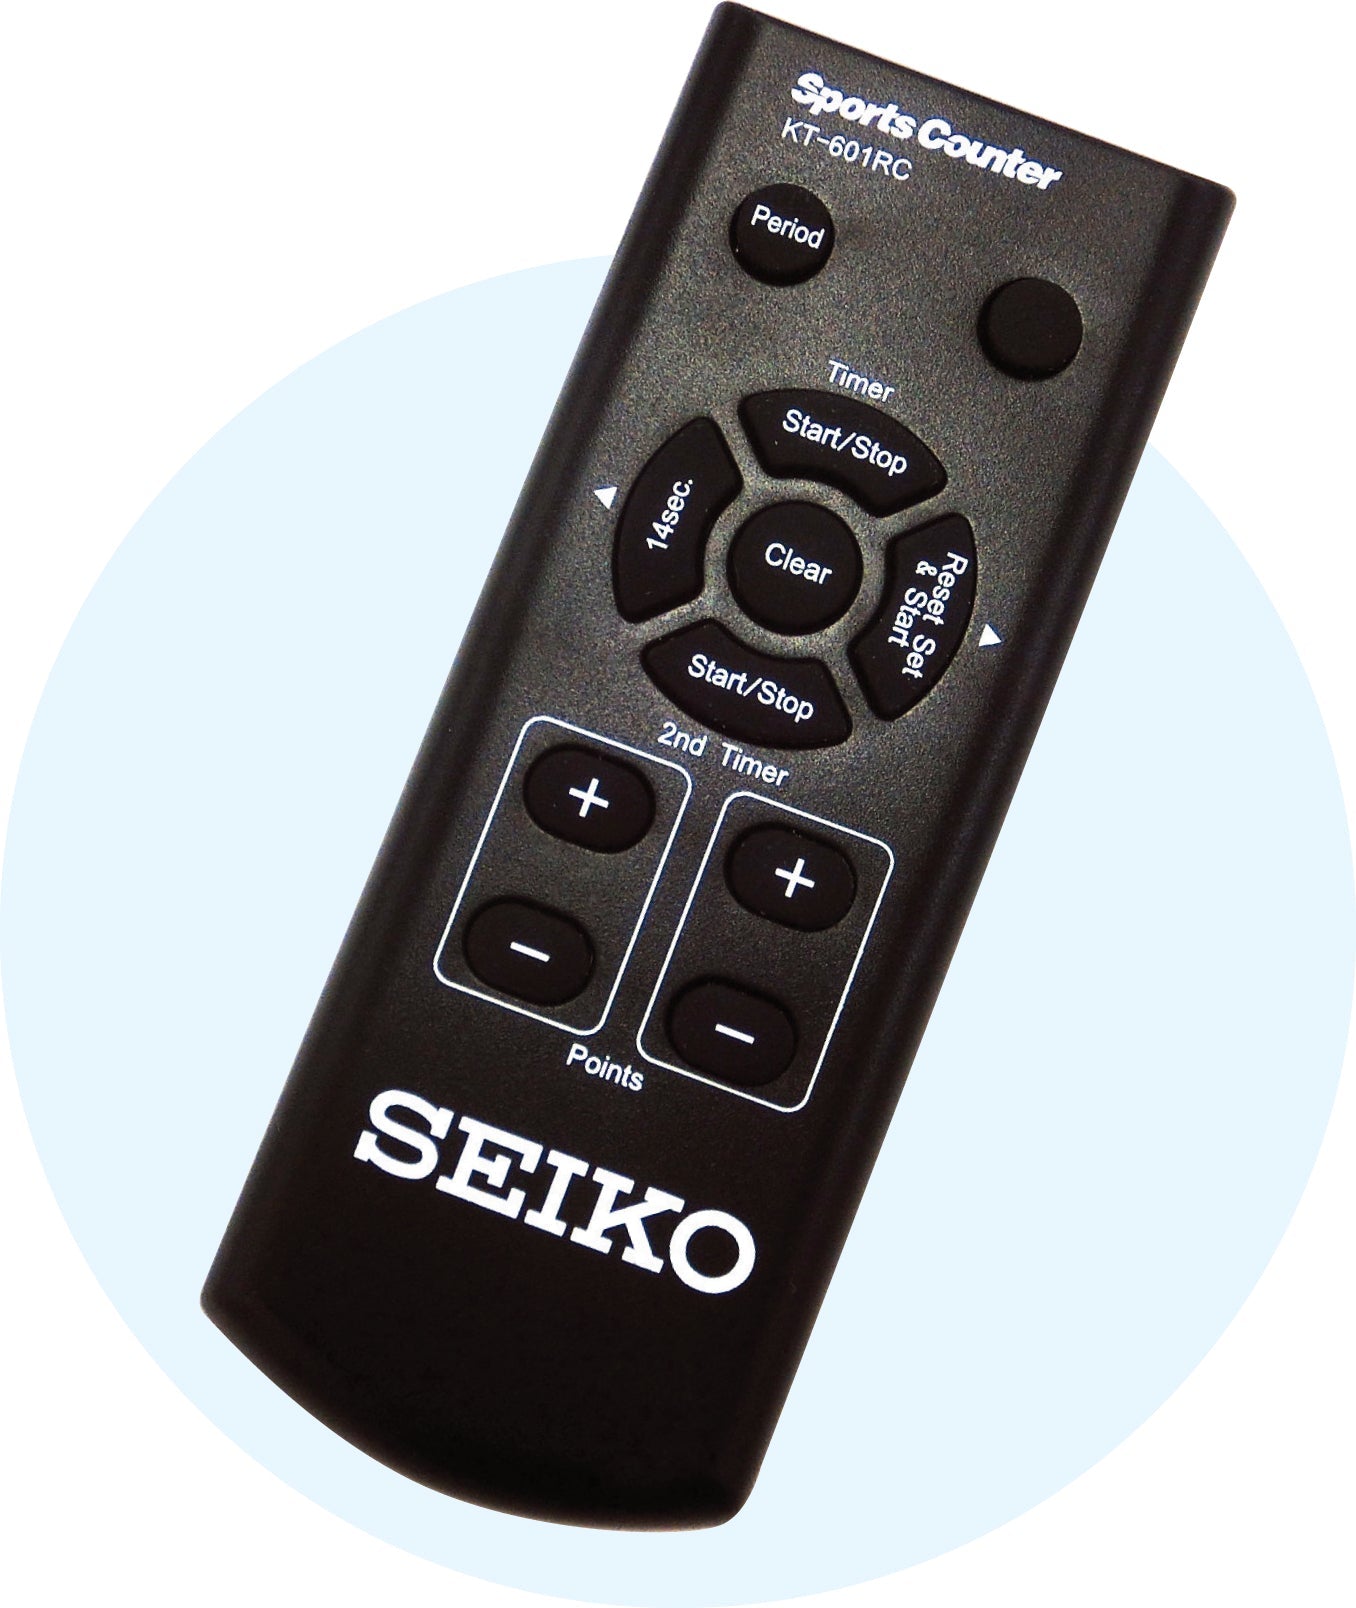 SEIKO KT-601RC - Additional Wireless Remote Controller for KT-601